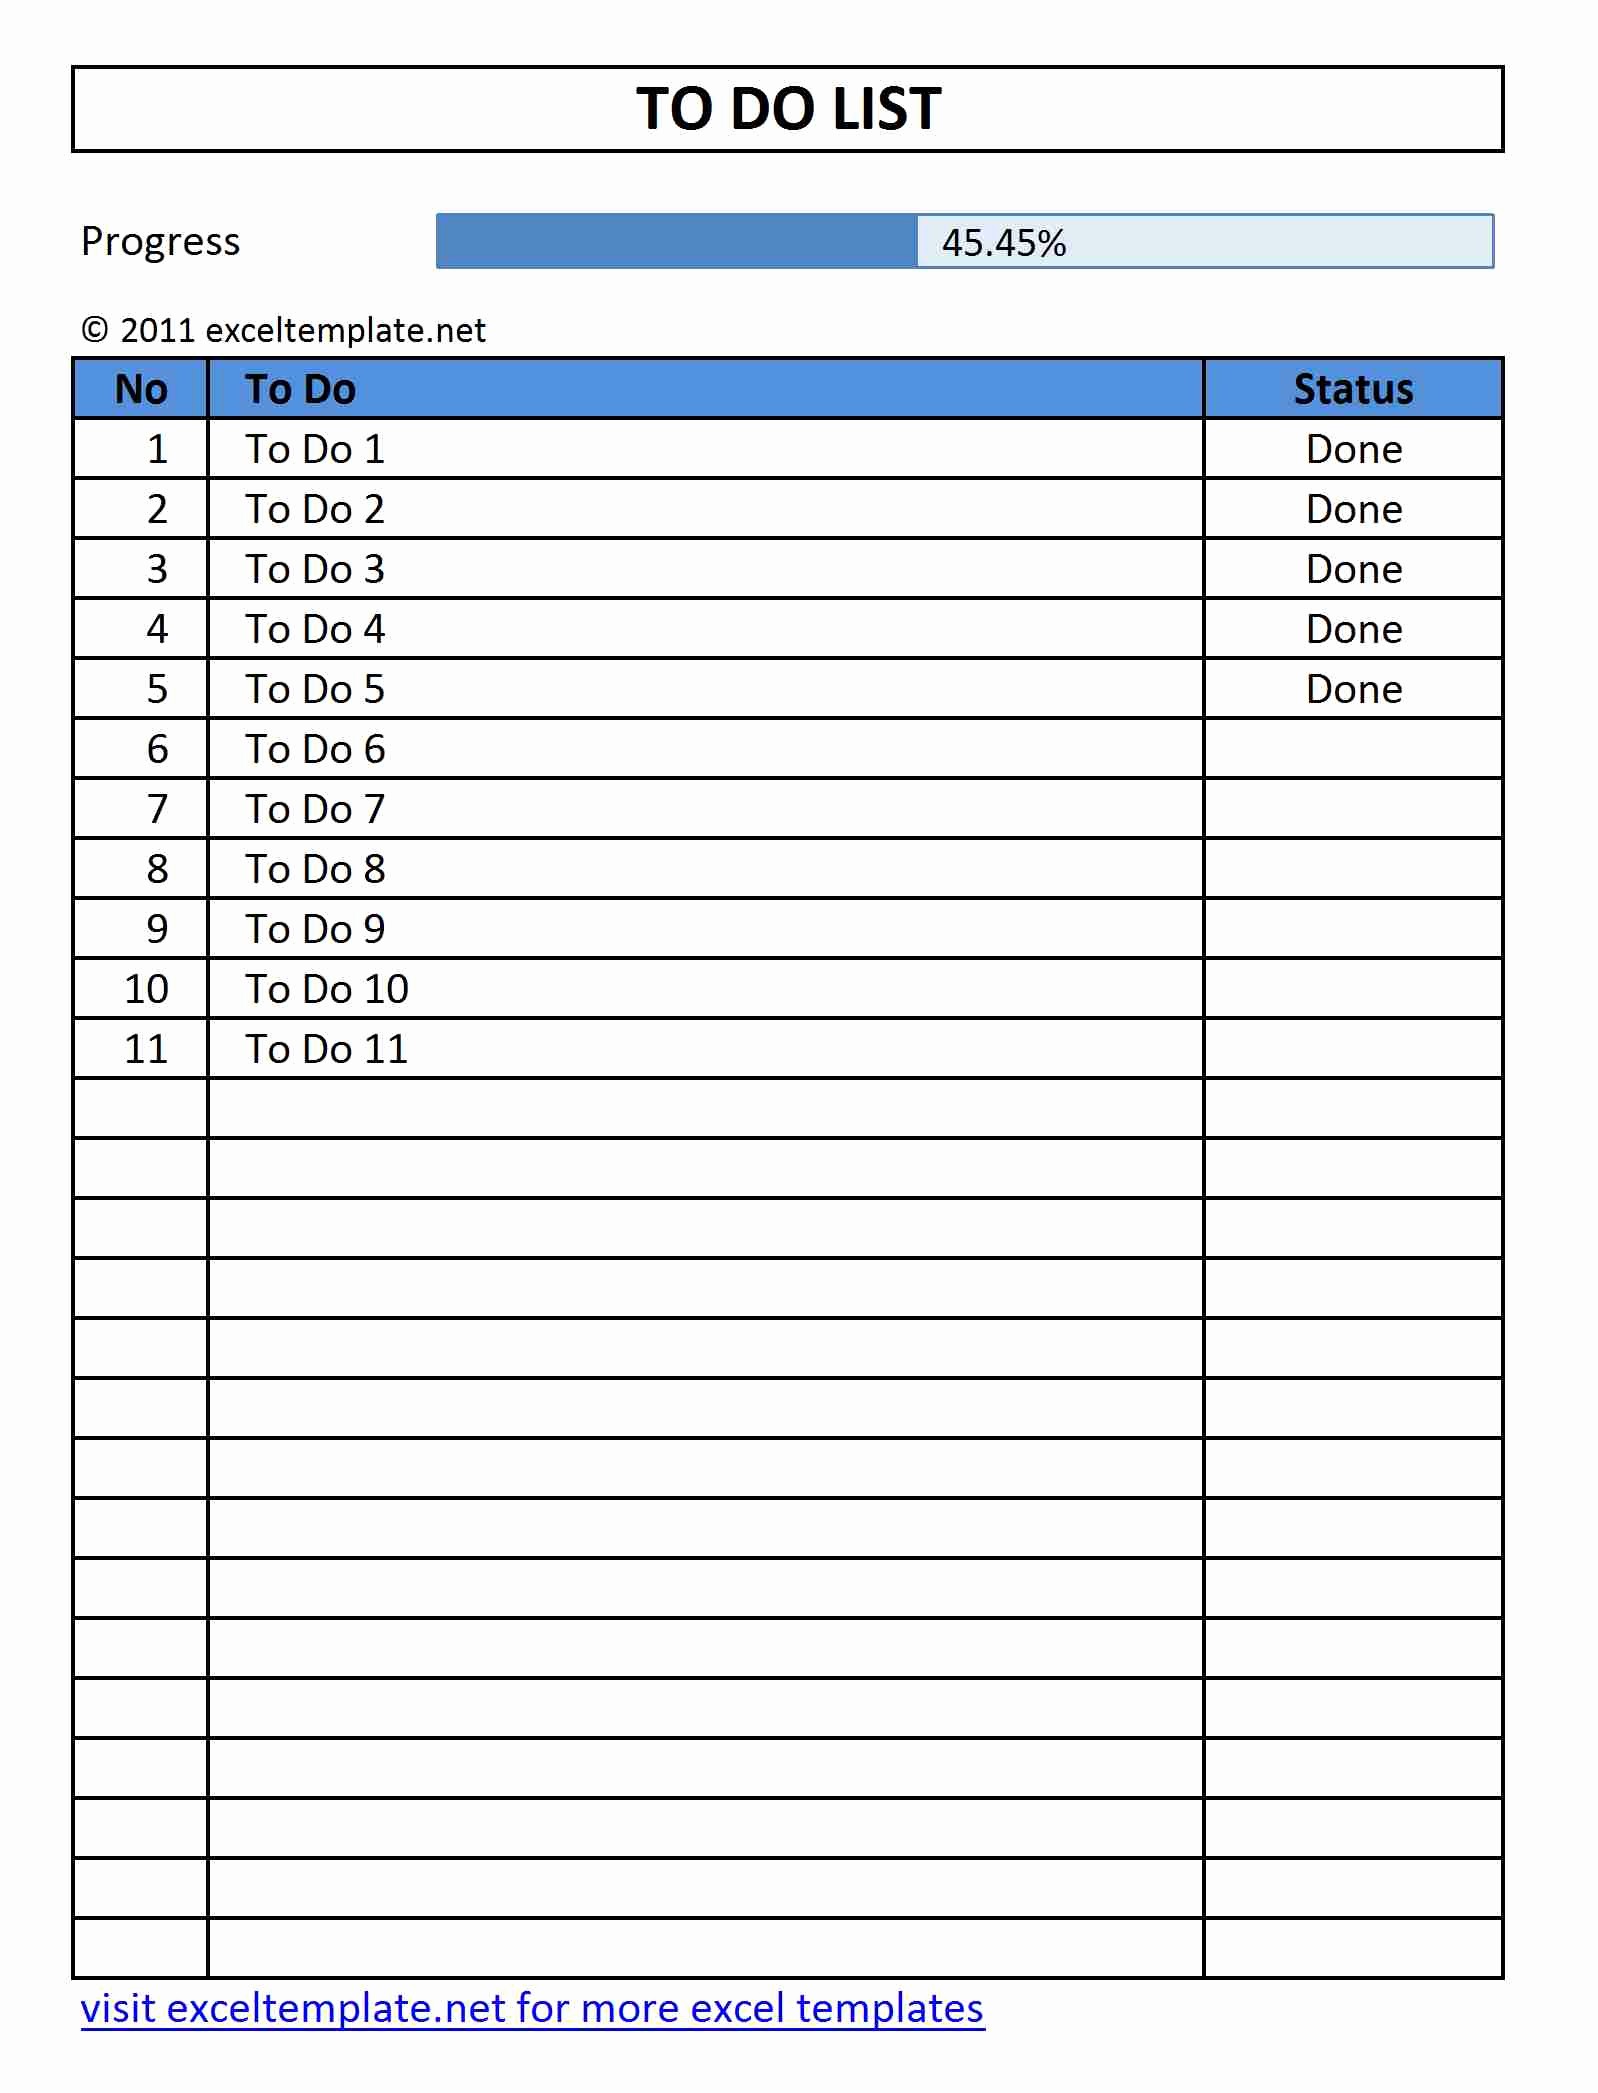 To Do List Excel Template New Simple to Do List